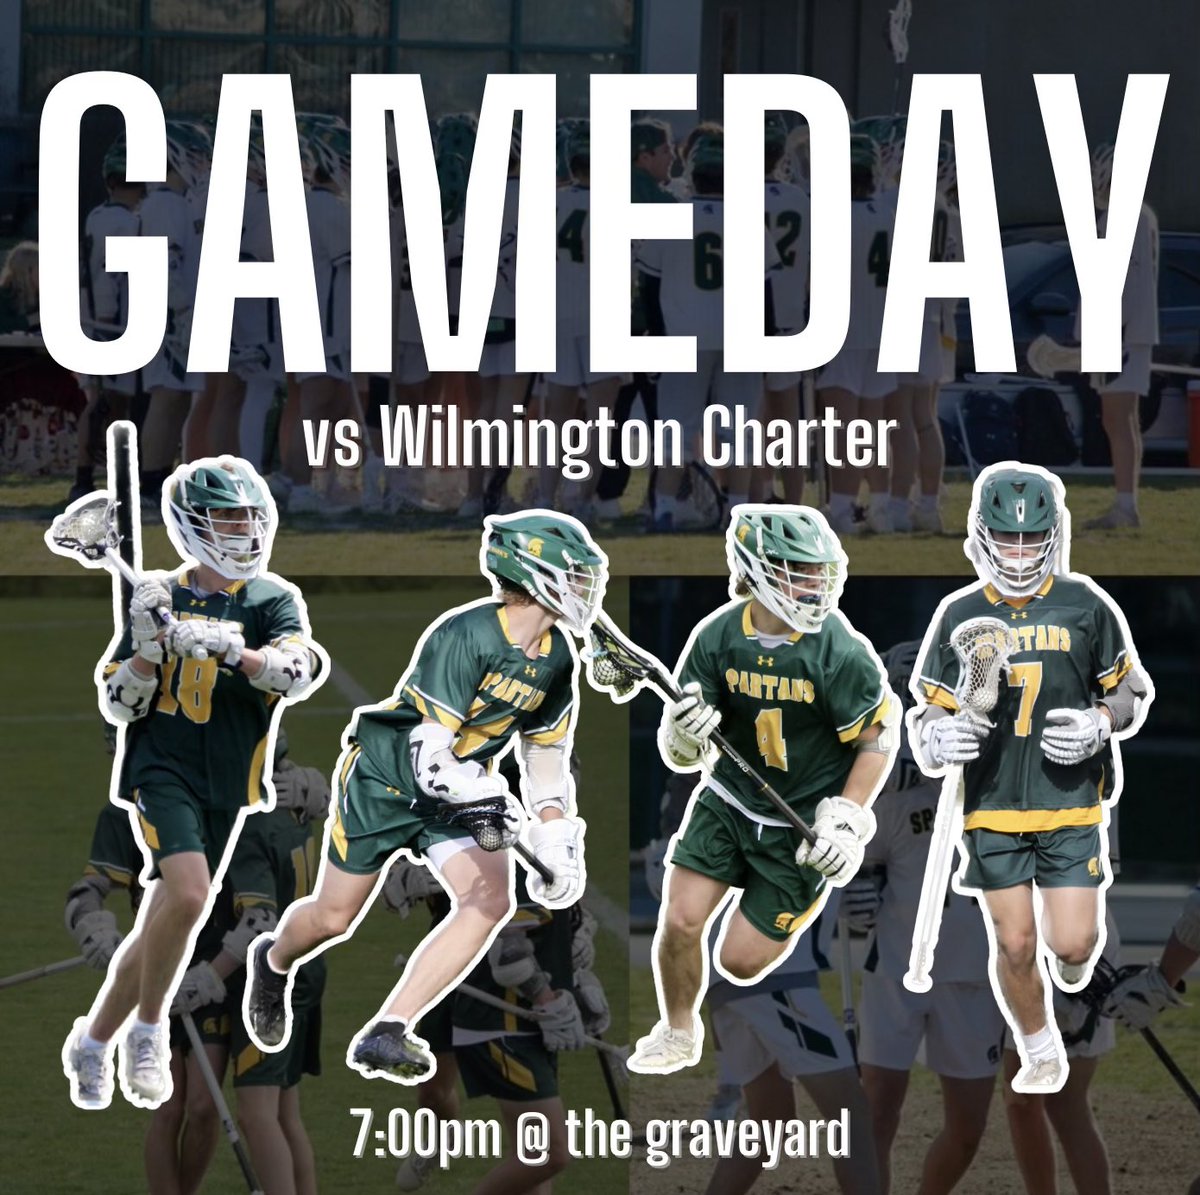 Spartans, it’s GAMEDAY 🥍 at @saintmarkshs under the lights! Come out and cheer on our boys Lacrosse team! Wear White ☑️.                                                           #saintmarkshs #spartanstrong #allthingspossible #whiteout #underthelights #highschoollacrosse